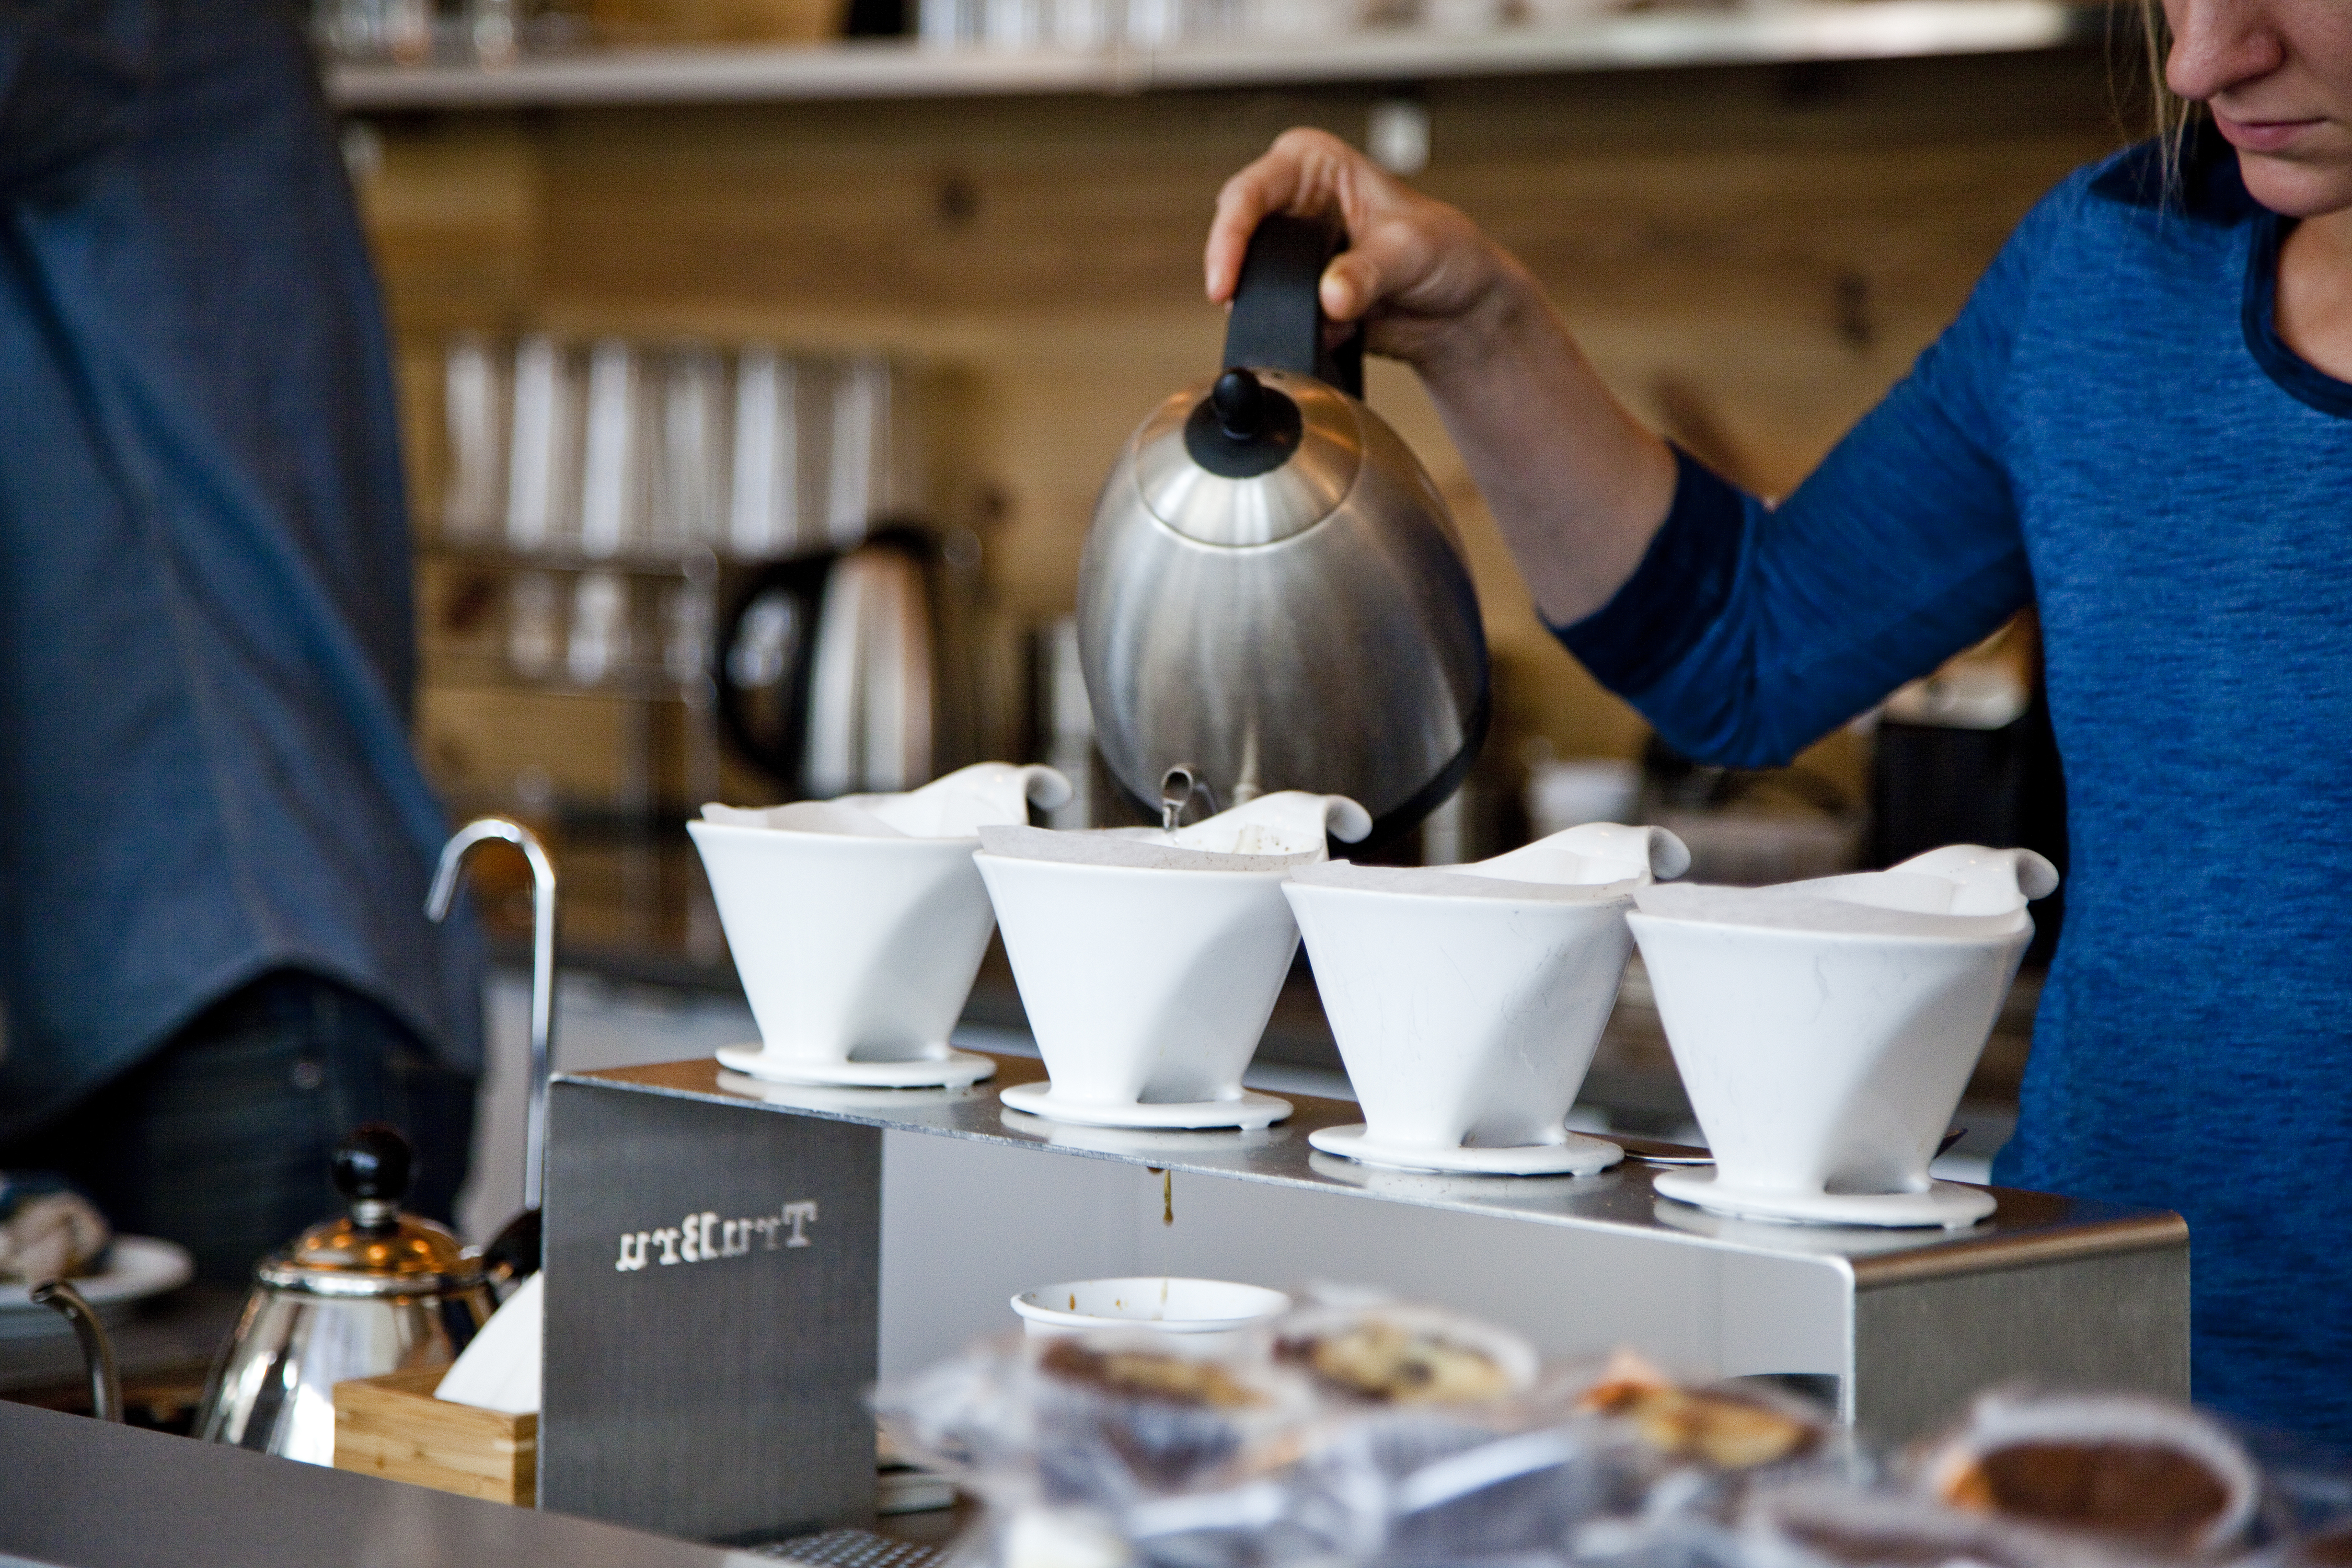 Photograph taken of a pour over coffee being brewed at Ultimo.